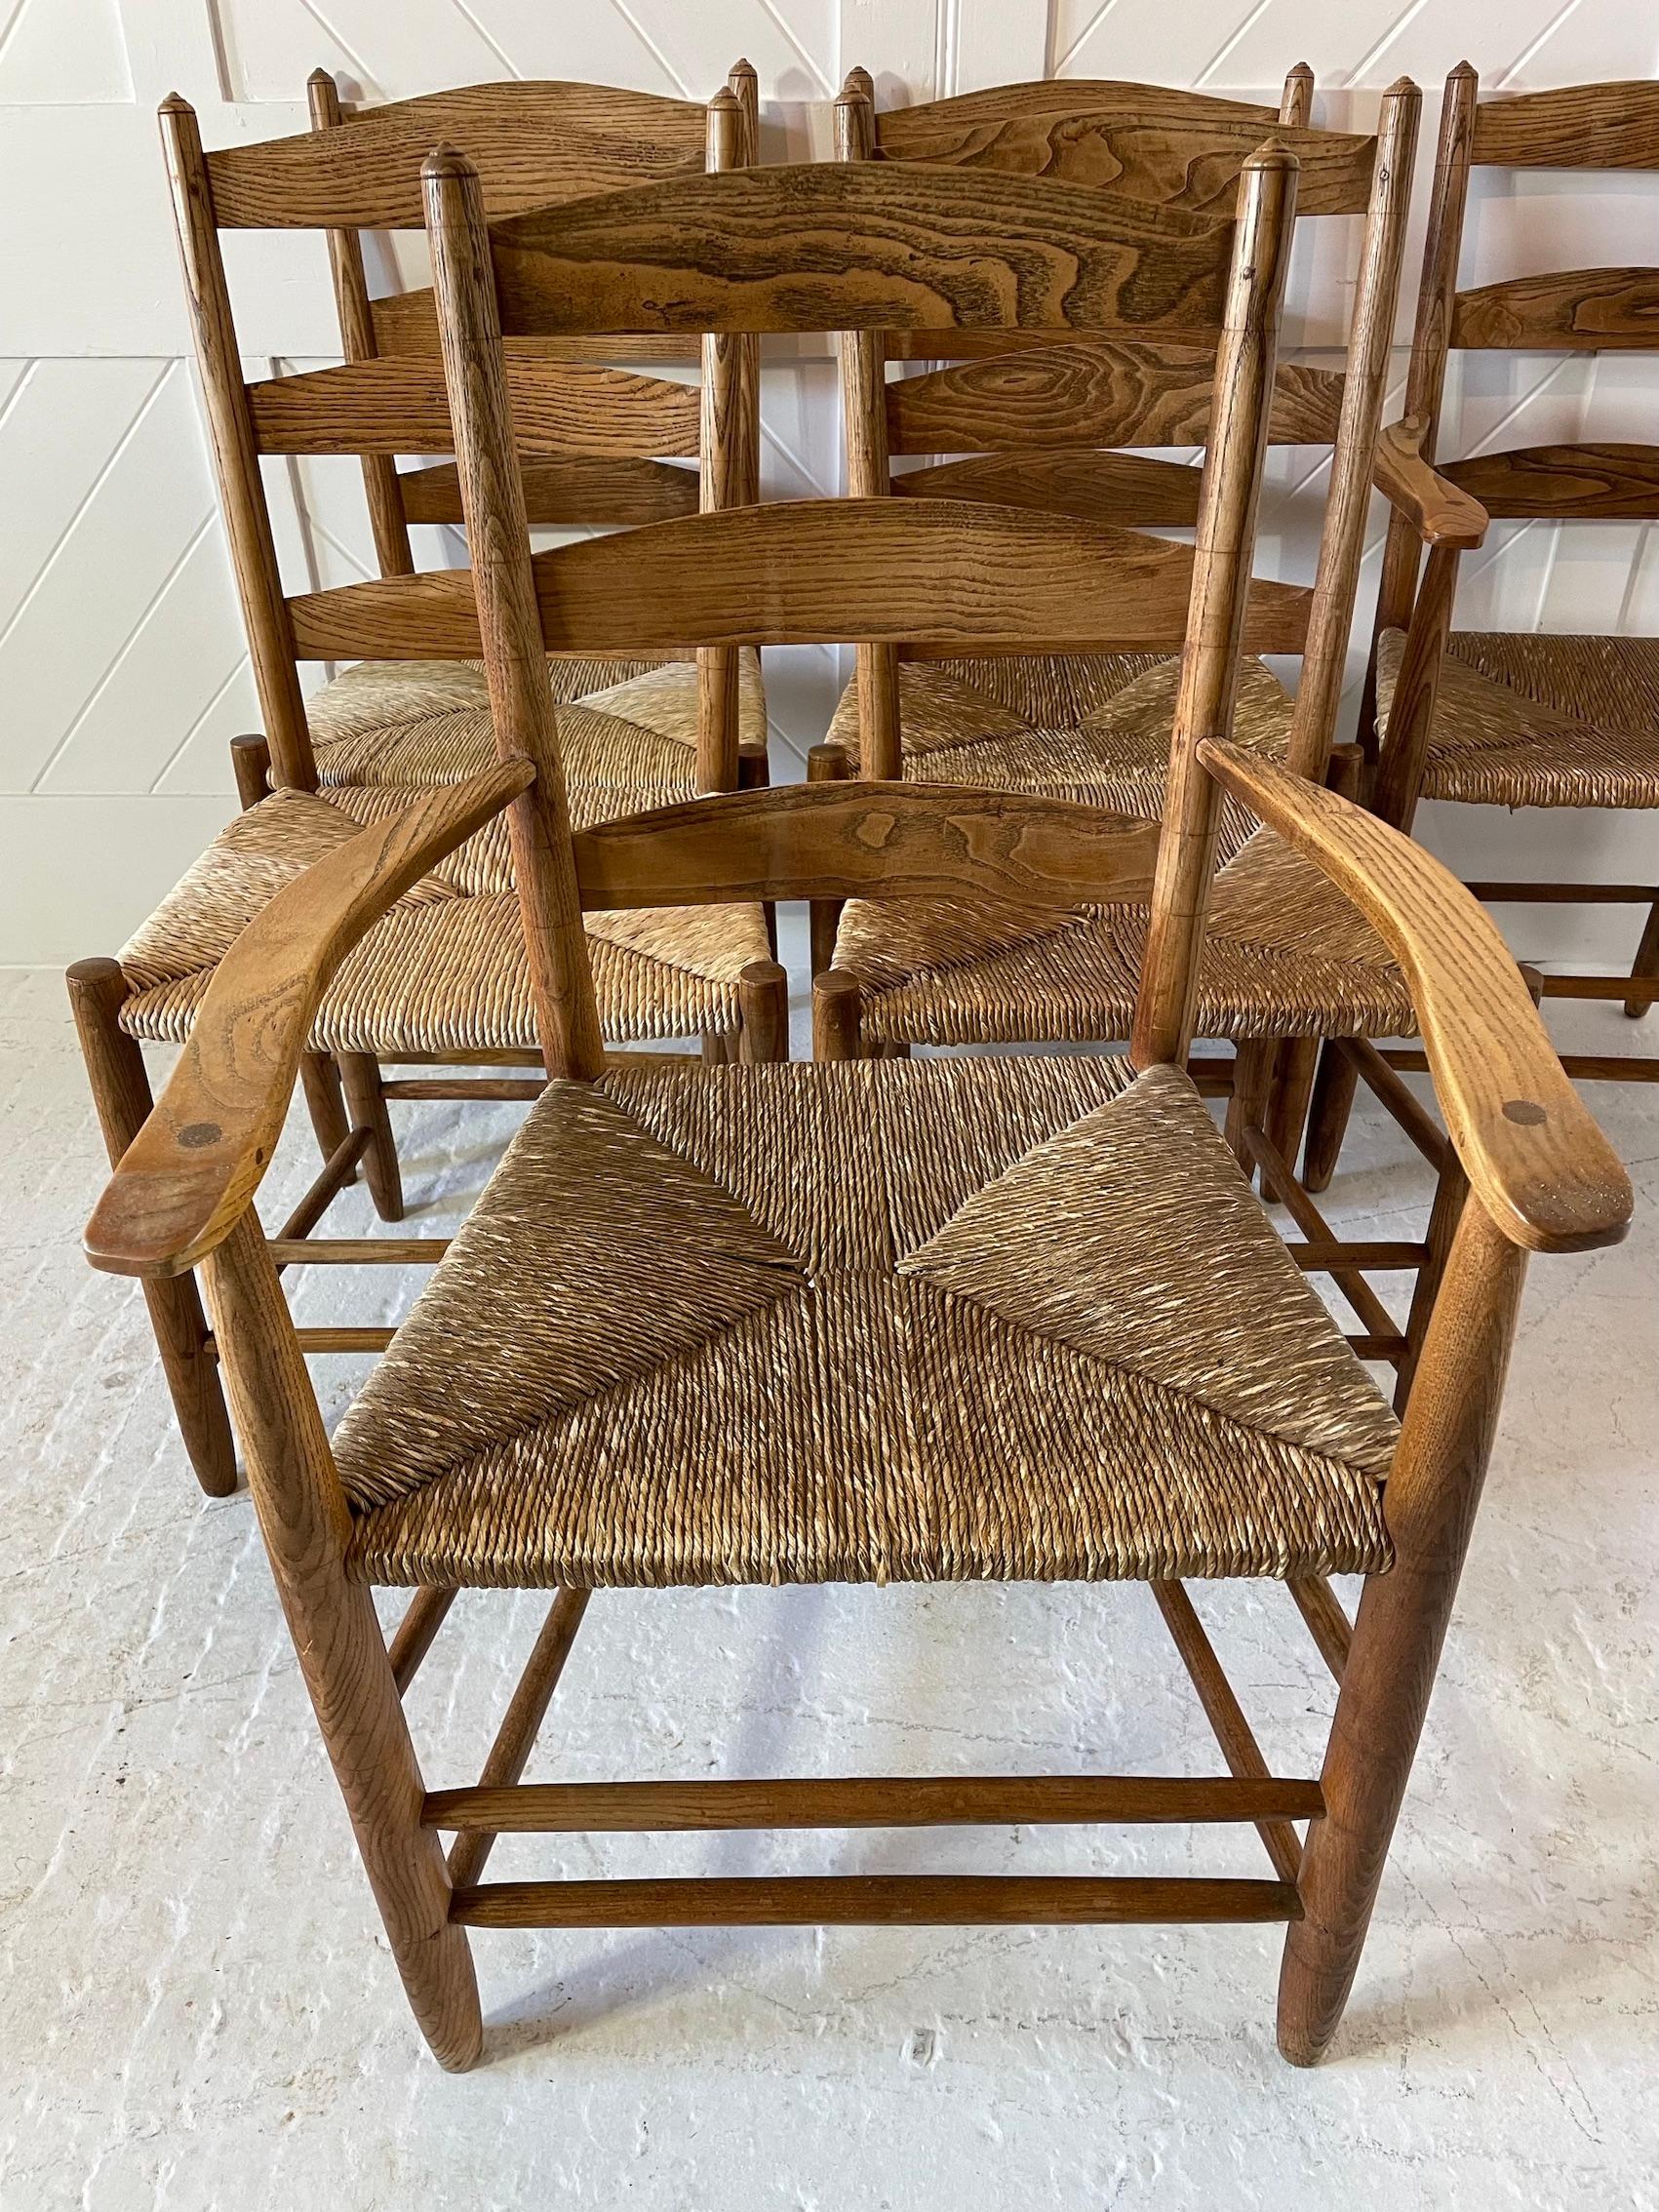 Arts & Crafts Cotswold School set of 6 ash rush seated chairs
The set consists of 2 carvers and 4 singles
circa 1920
The measurements are as follows:
Carvers: Height 98cm Width 57cm Depth 48cm
Singles: Height 98cm Width 49cm Depth 47cm

The